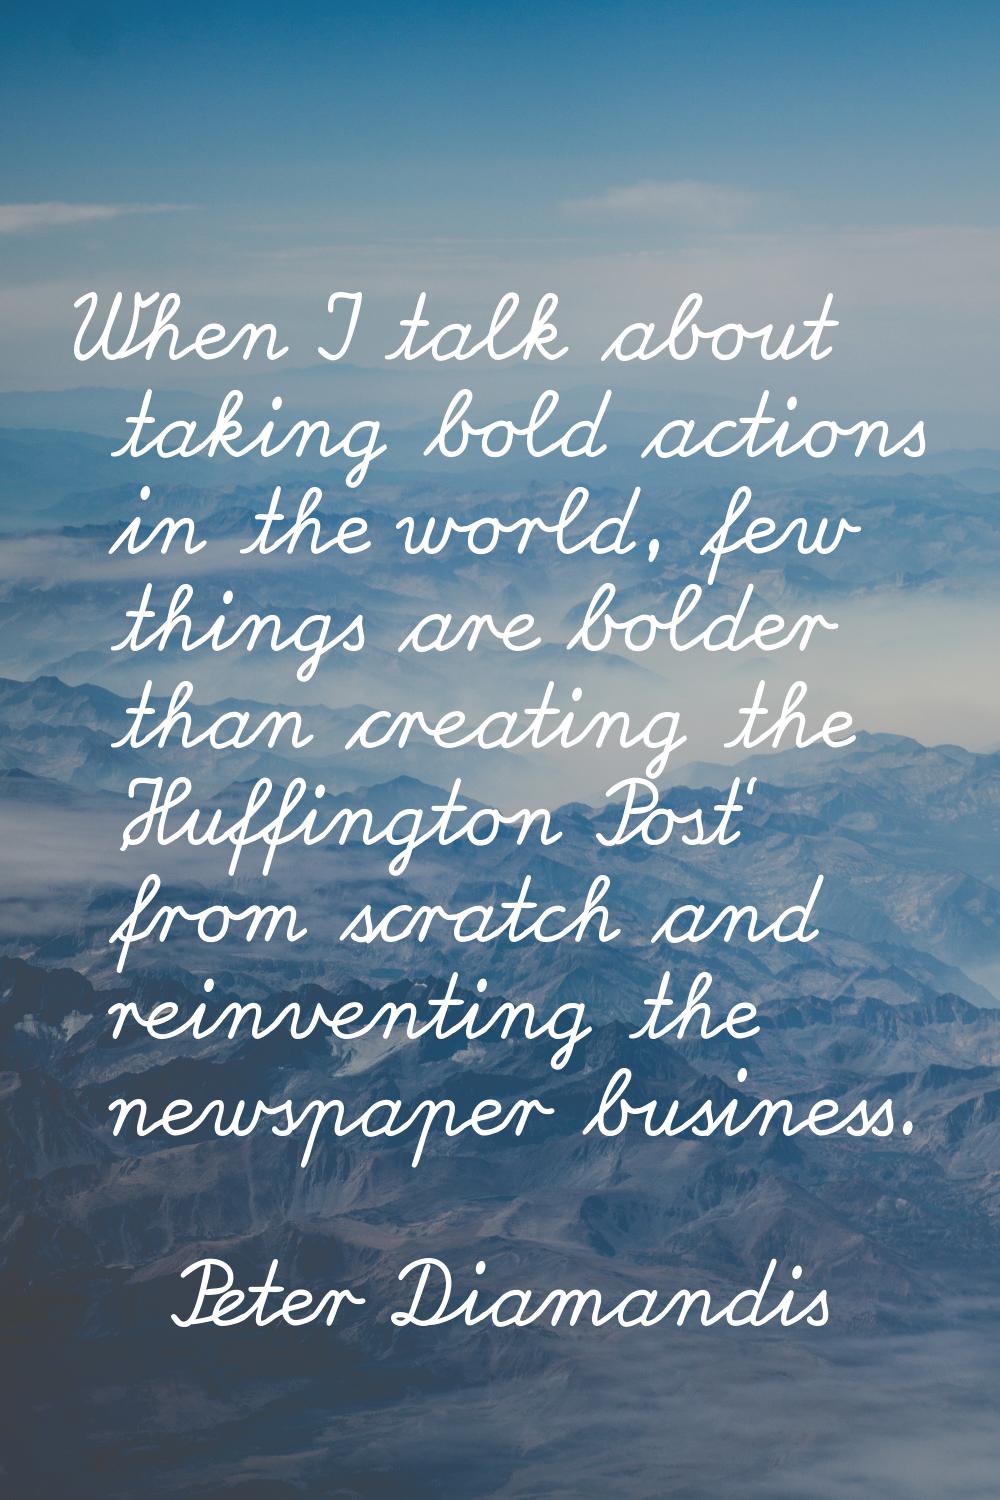 When I talk about taking bold actions in the world, few things are bolder than creating the 'Huffin